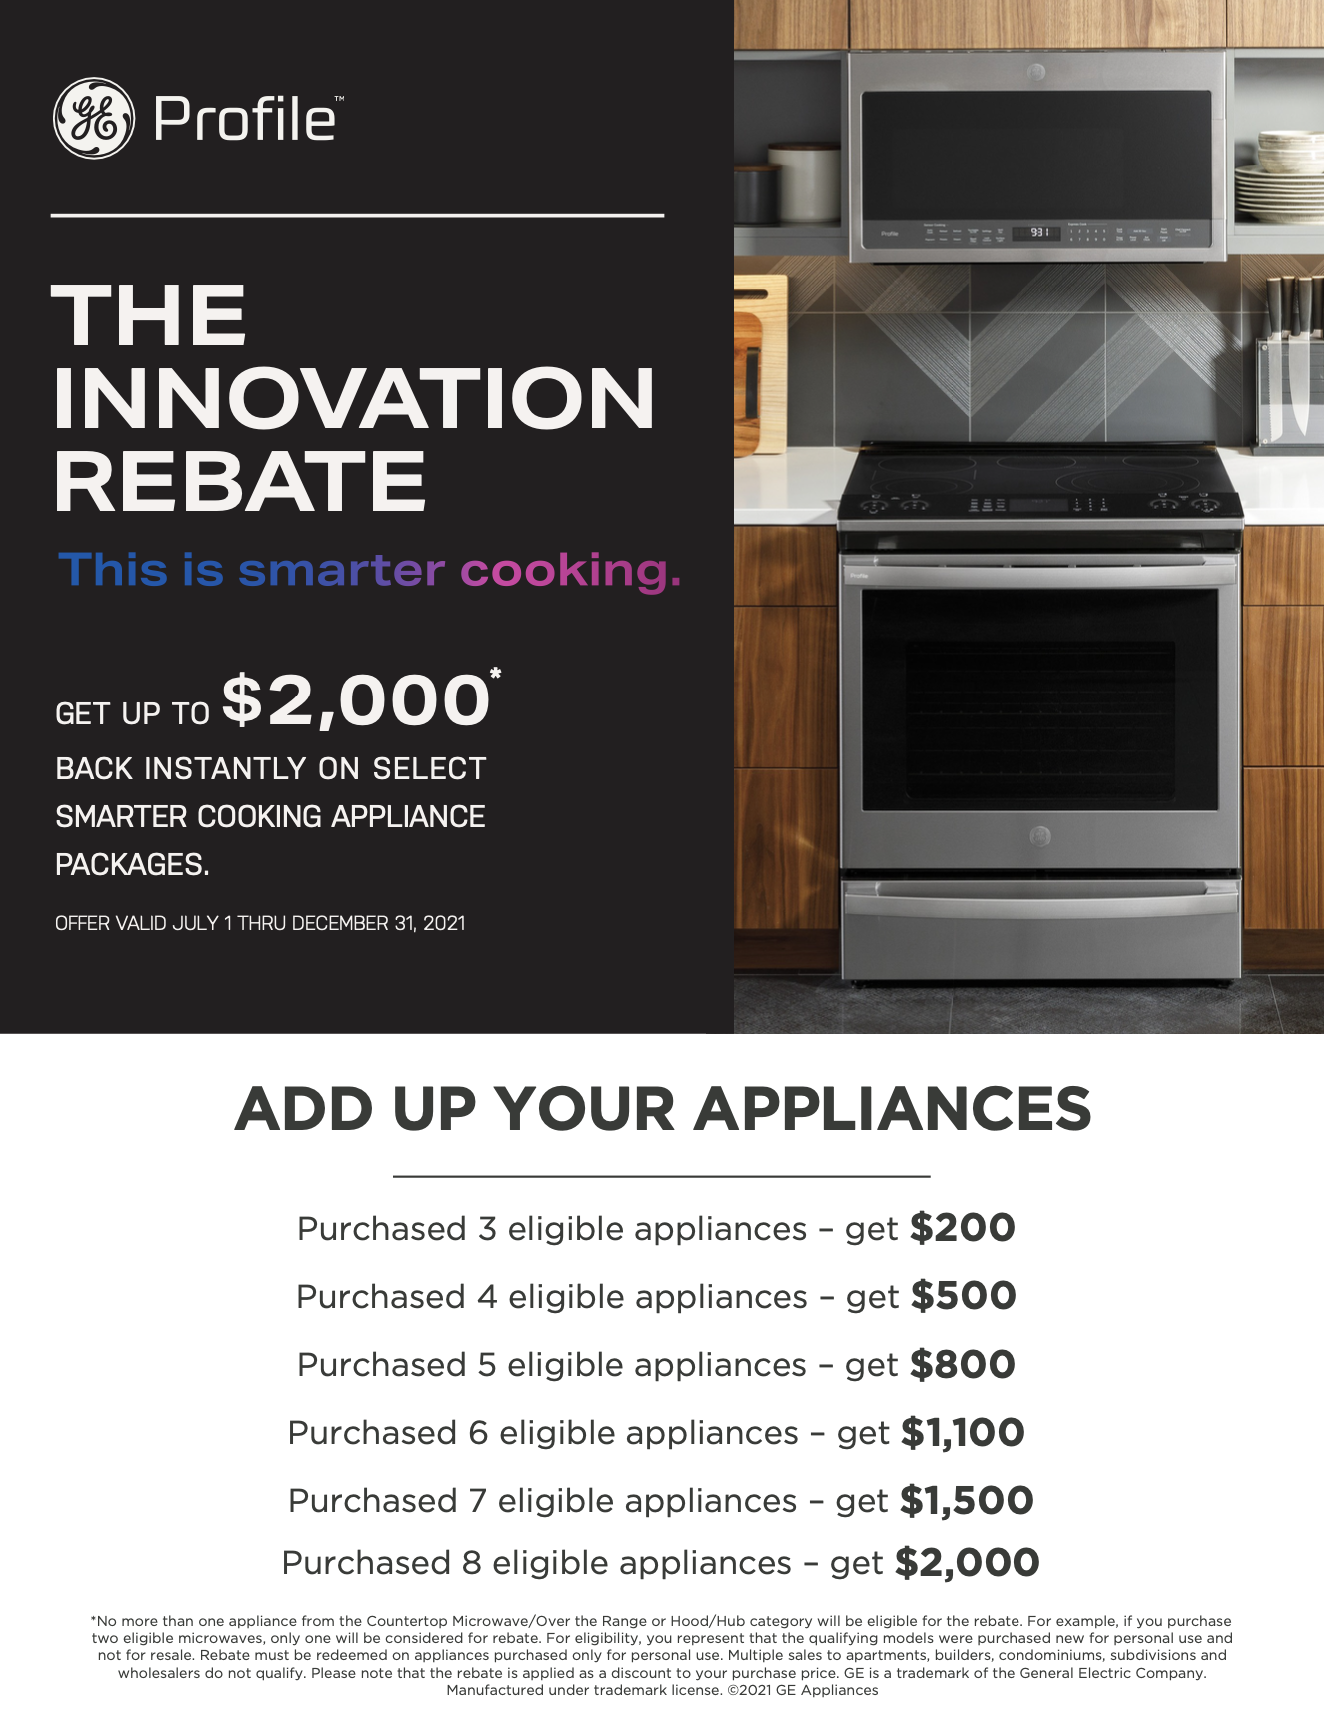 Home Depot Rebate for Cooking Appliances